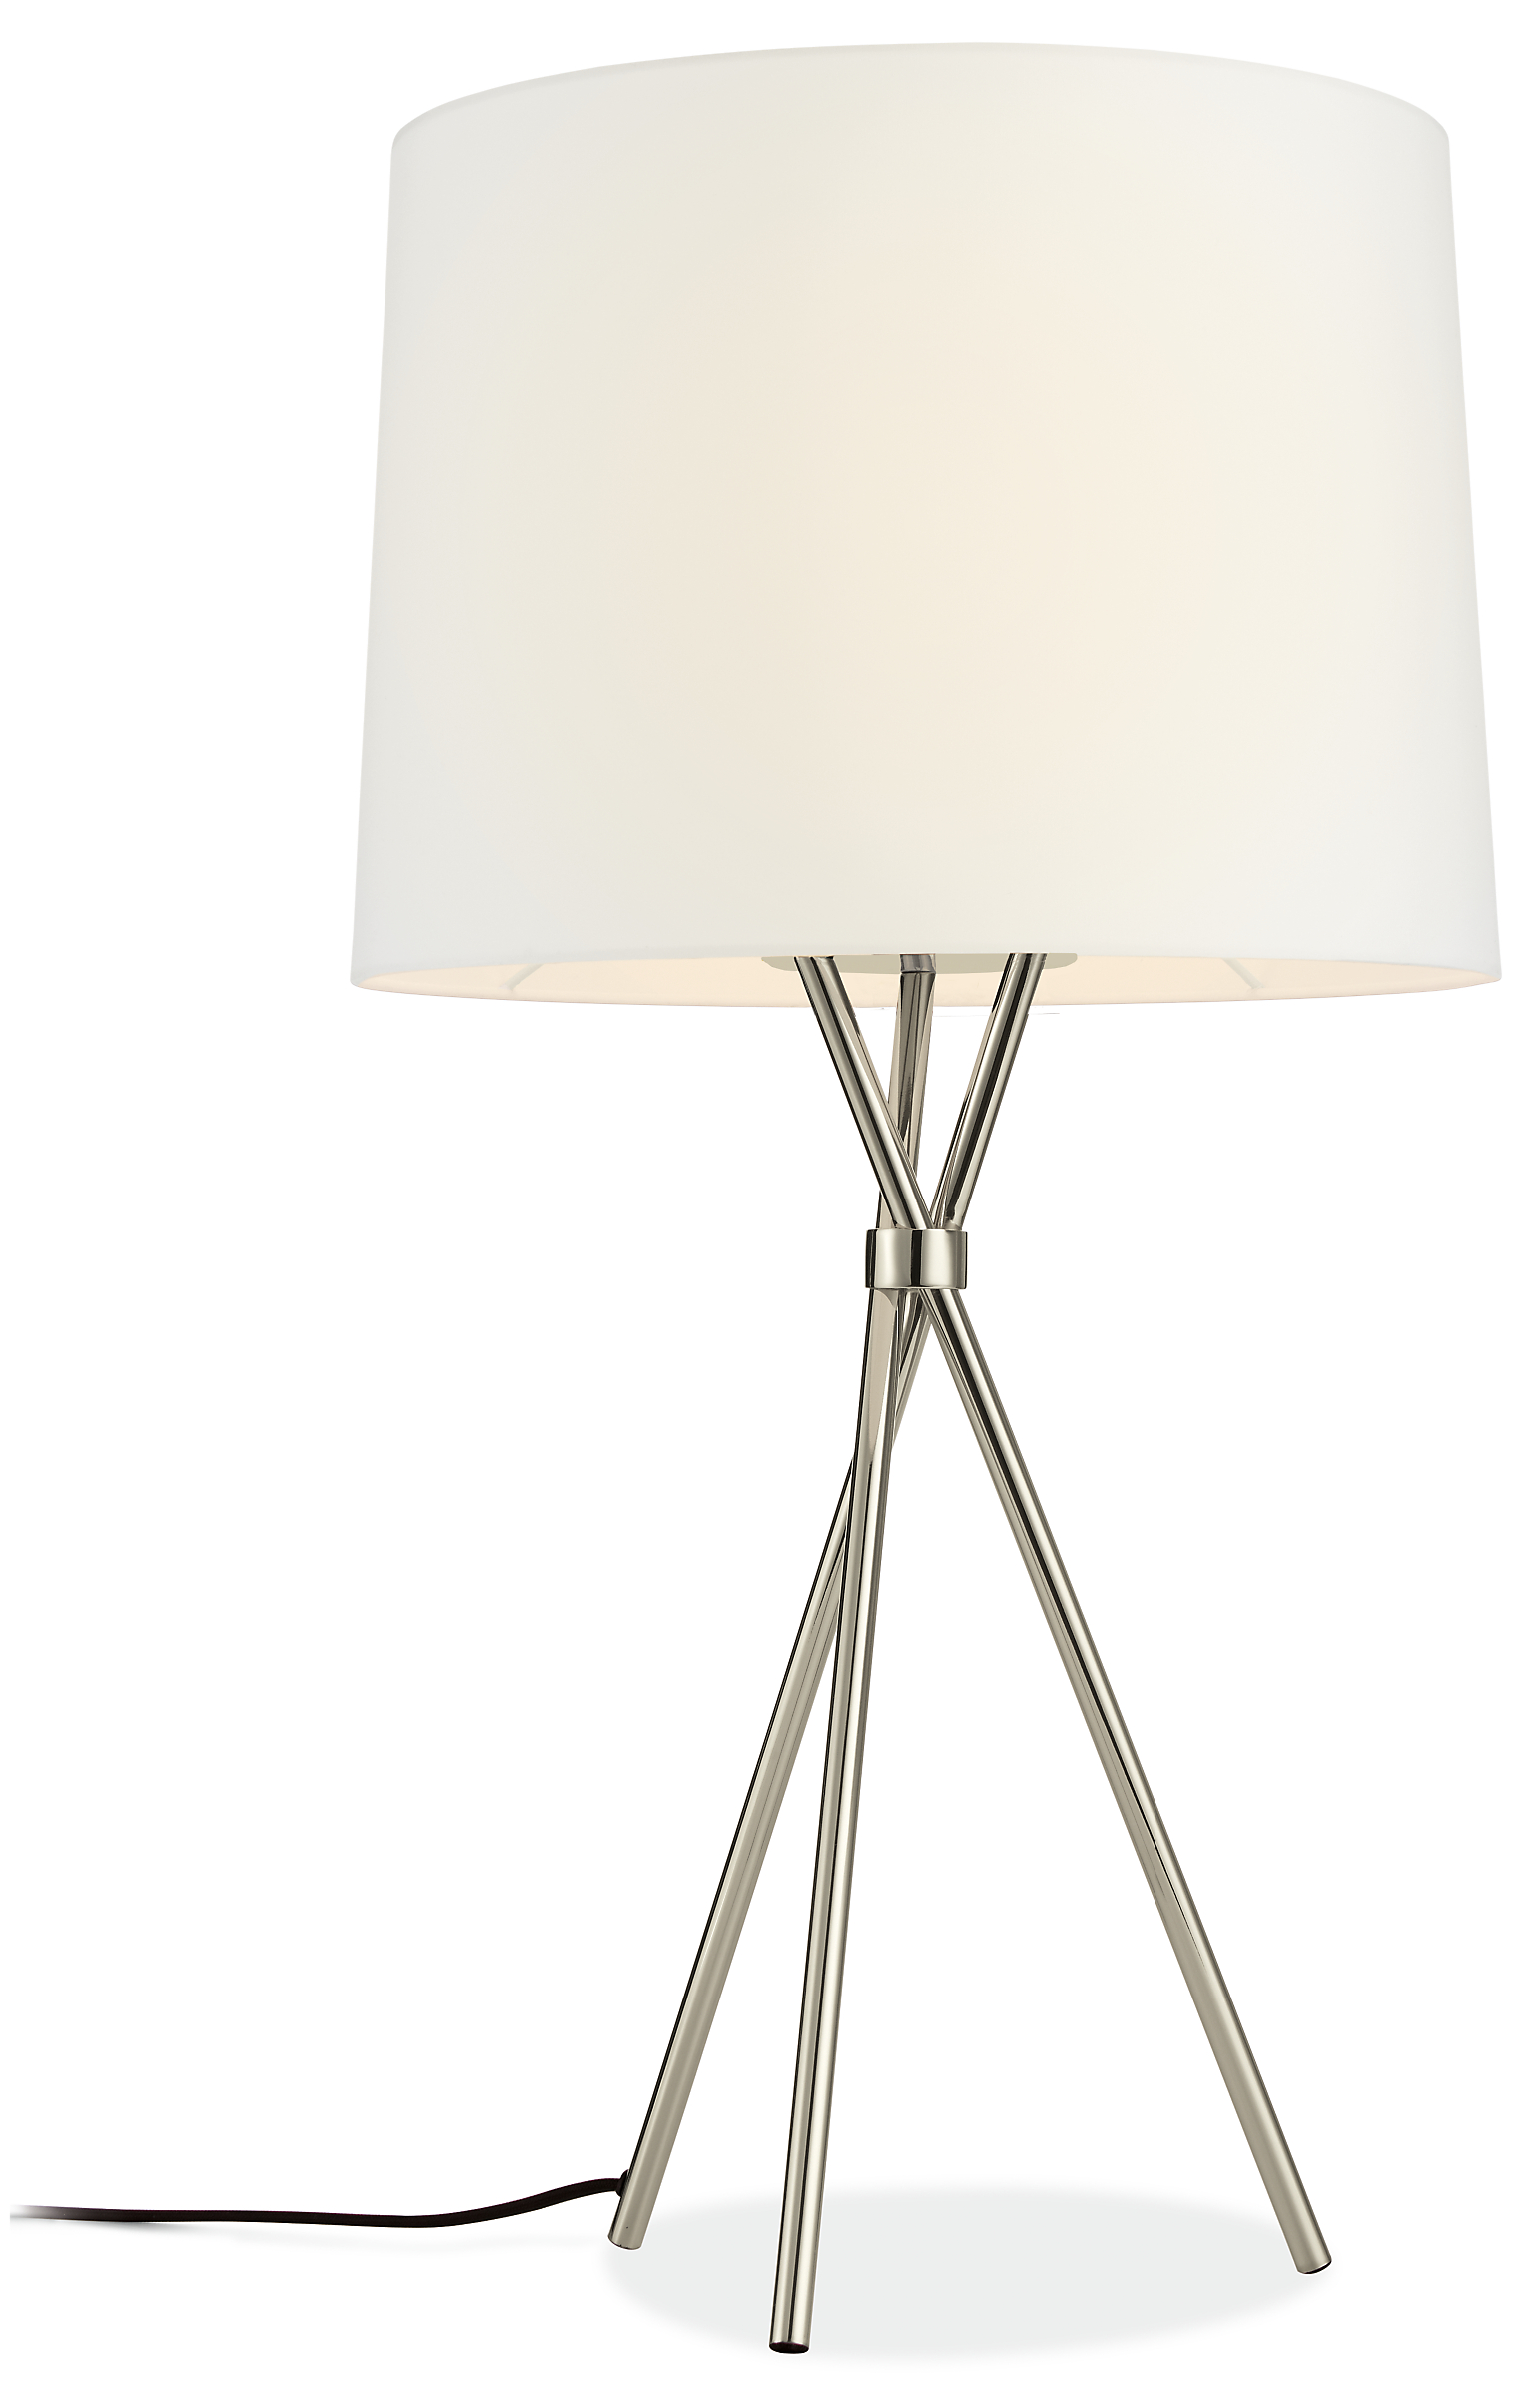 Tri-Plex Table Lamp in White with Polished Nickel